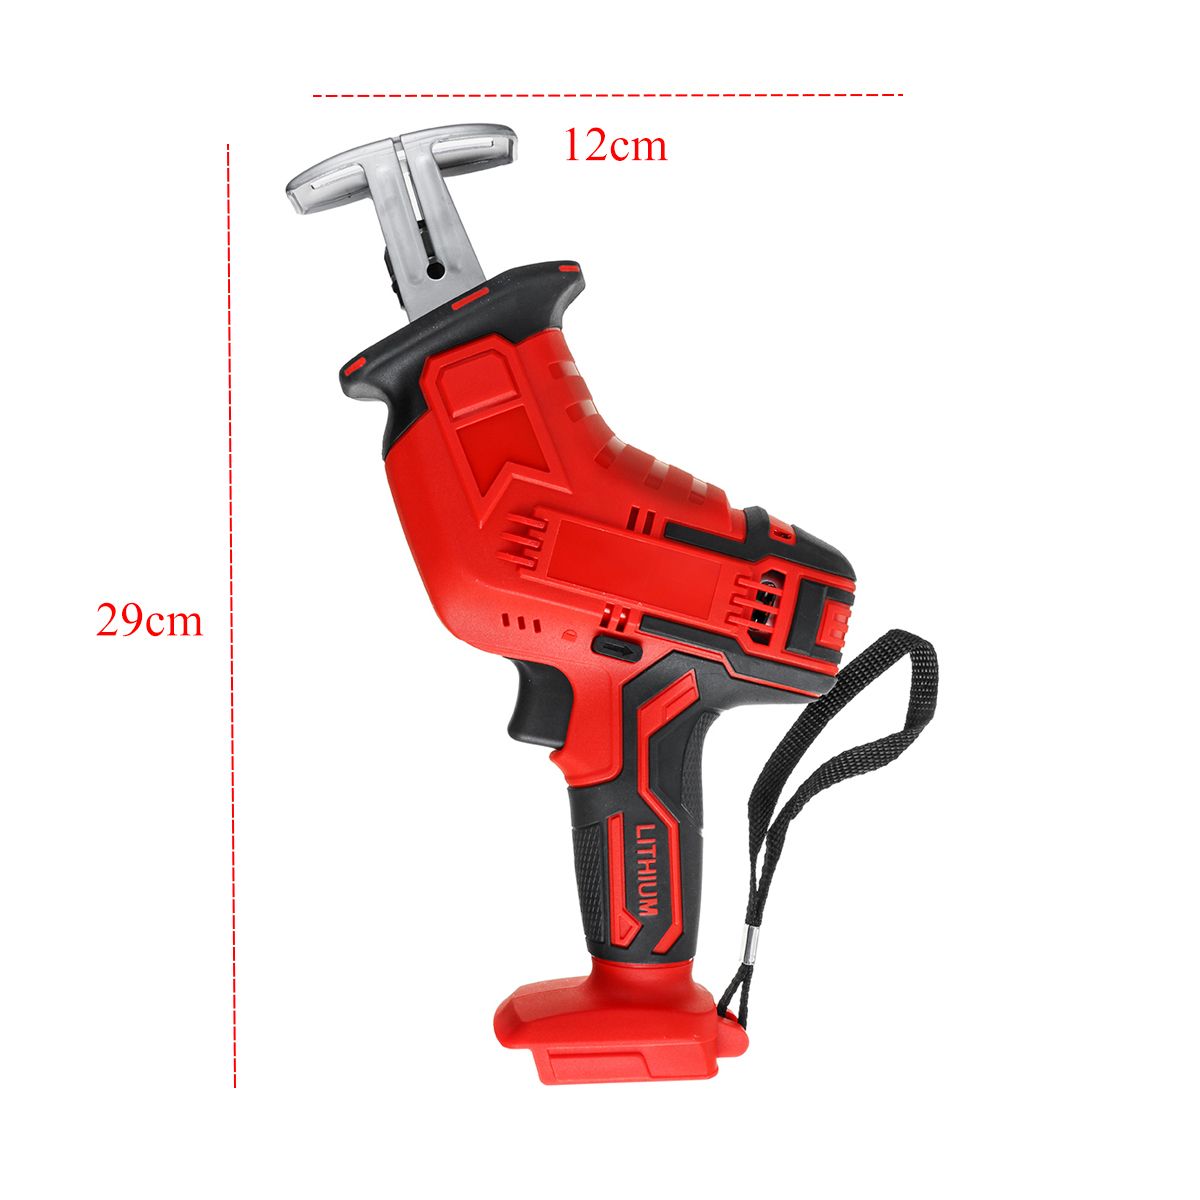 110-220V-21V-2-Lithium-Battery-Charging-Reciprocating-Saw-PVC-Pipes-Wood-Metal-Cutter-1667856